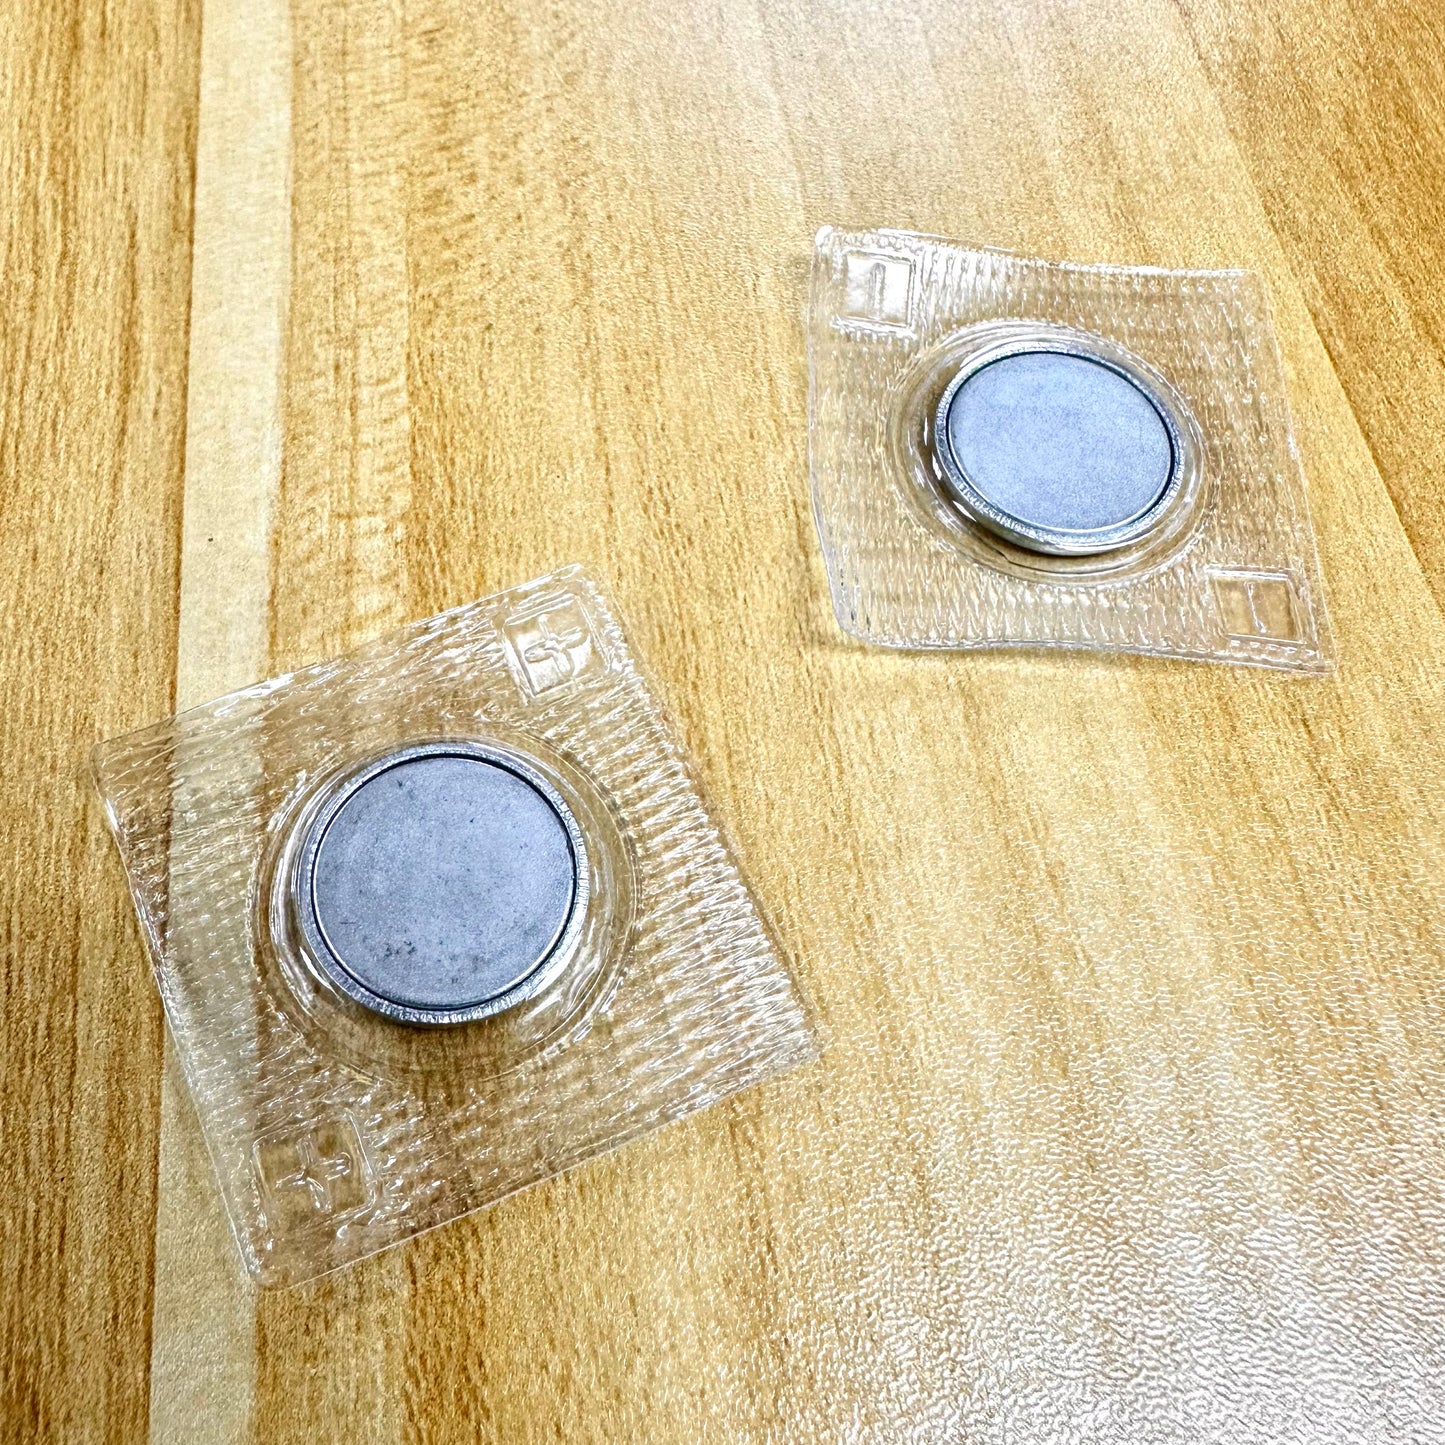 Invisible Sewing Round Strong Magnet Button 17mm 隱形強力磁石扣17mm